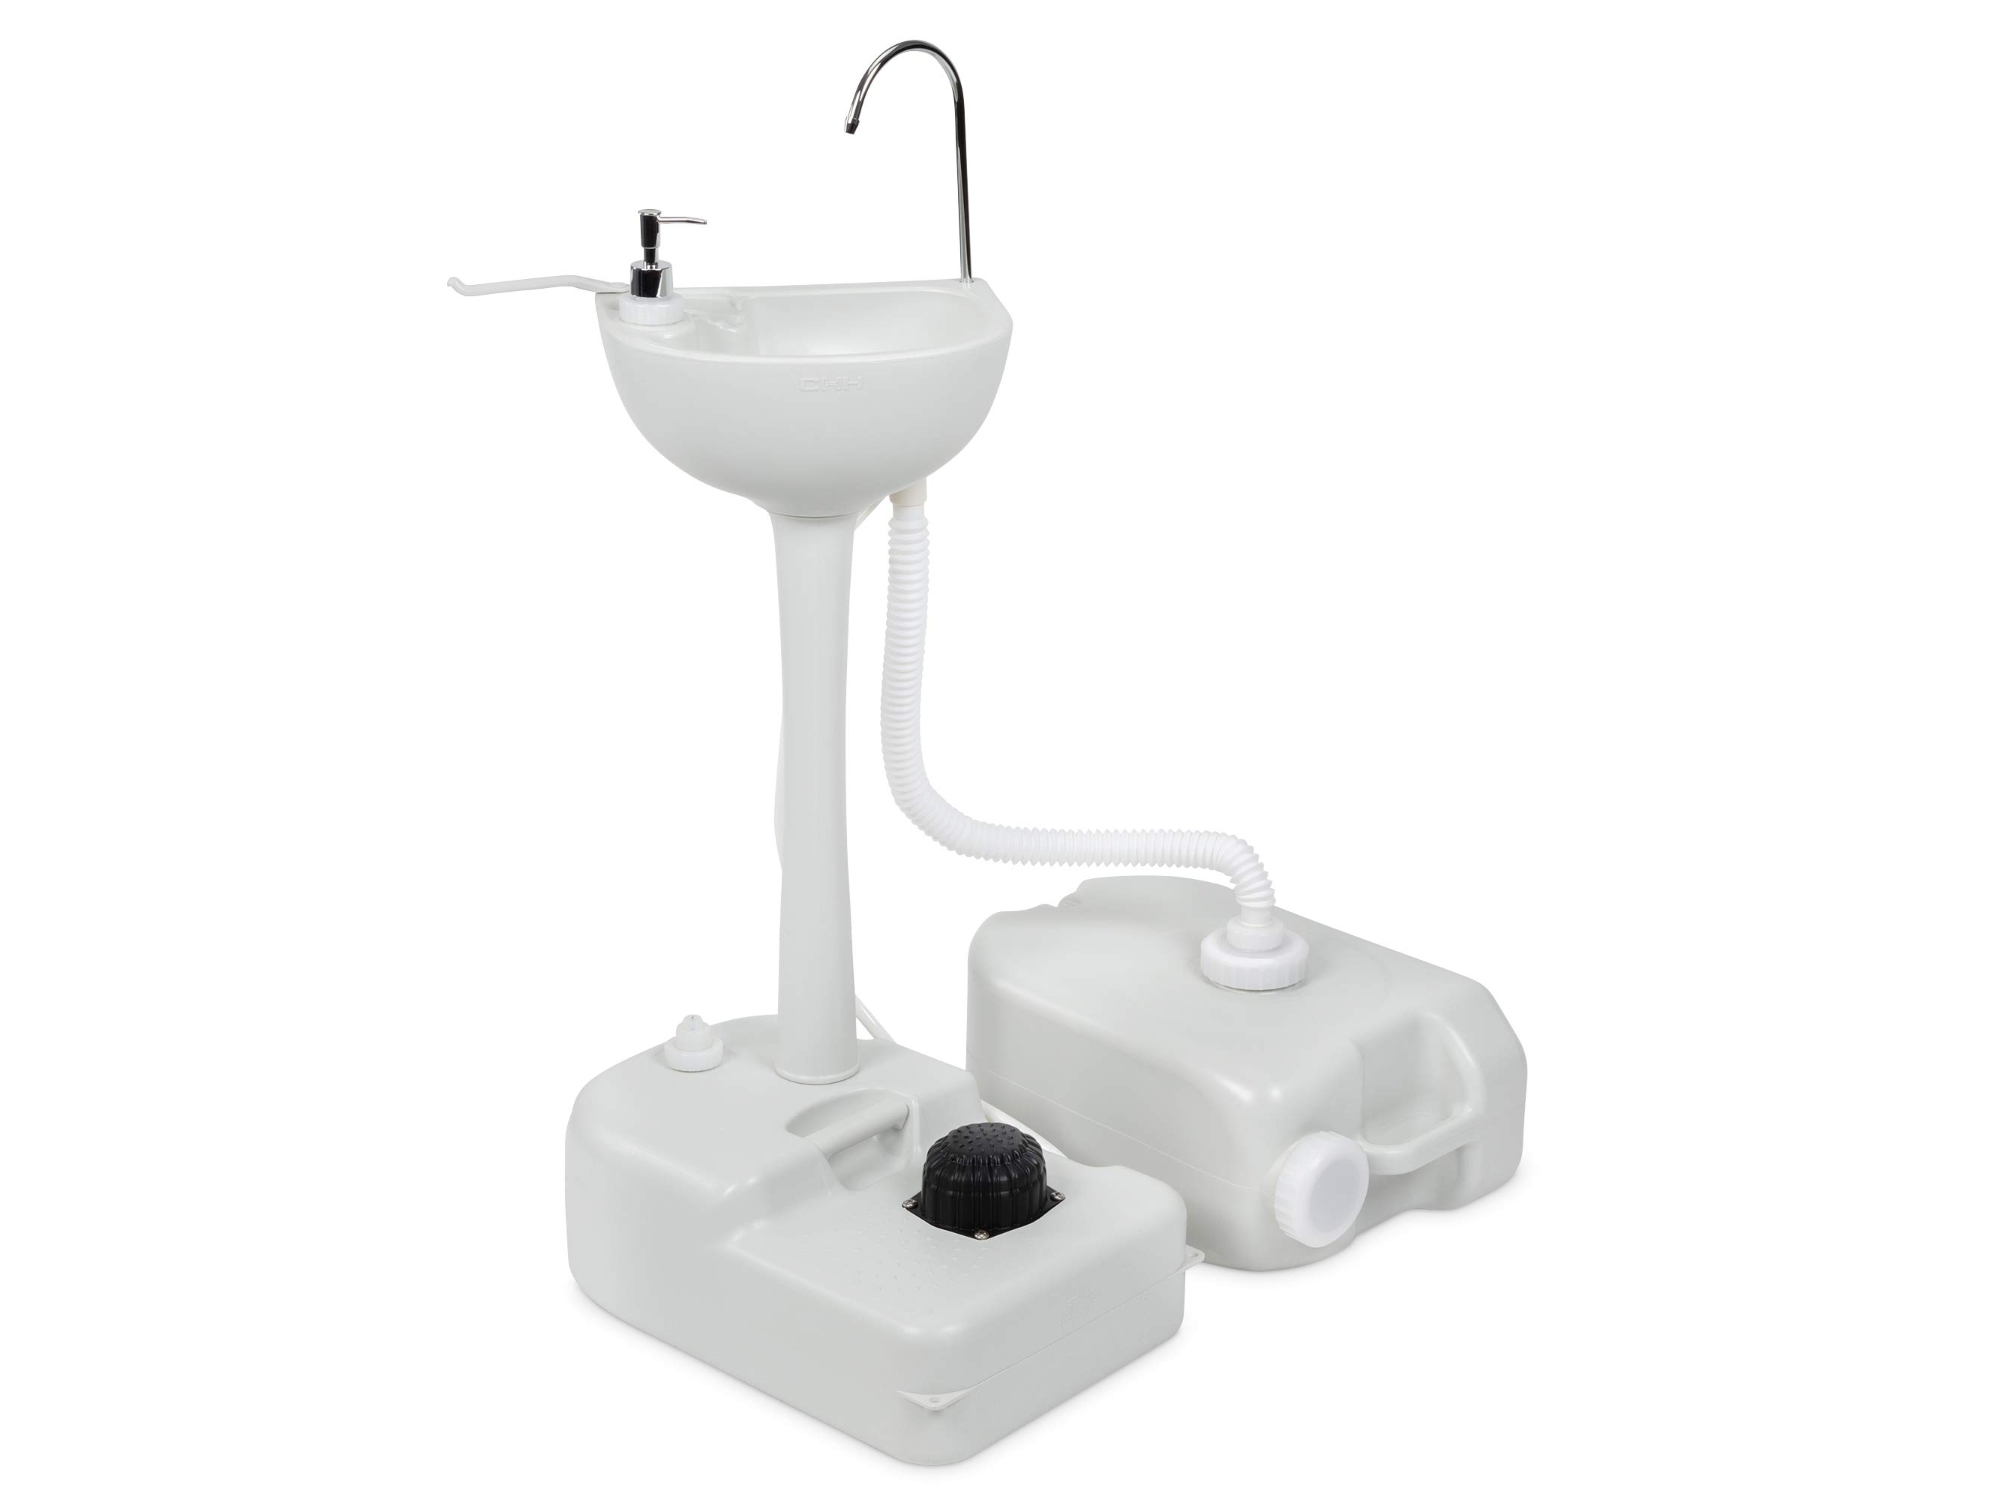 Image of Hike Crew Camping Portable Sink W/ Foot Pump & 5 Gallon Water Tank White ID 843812139380